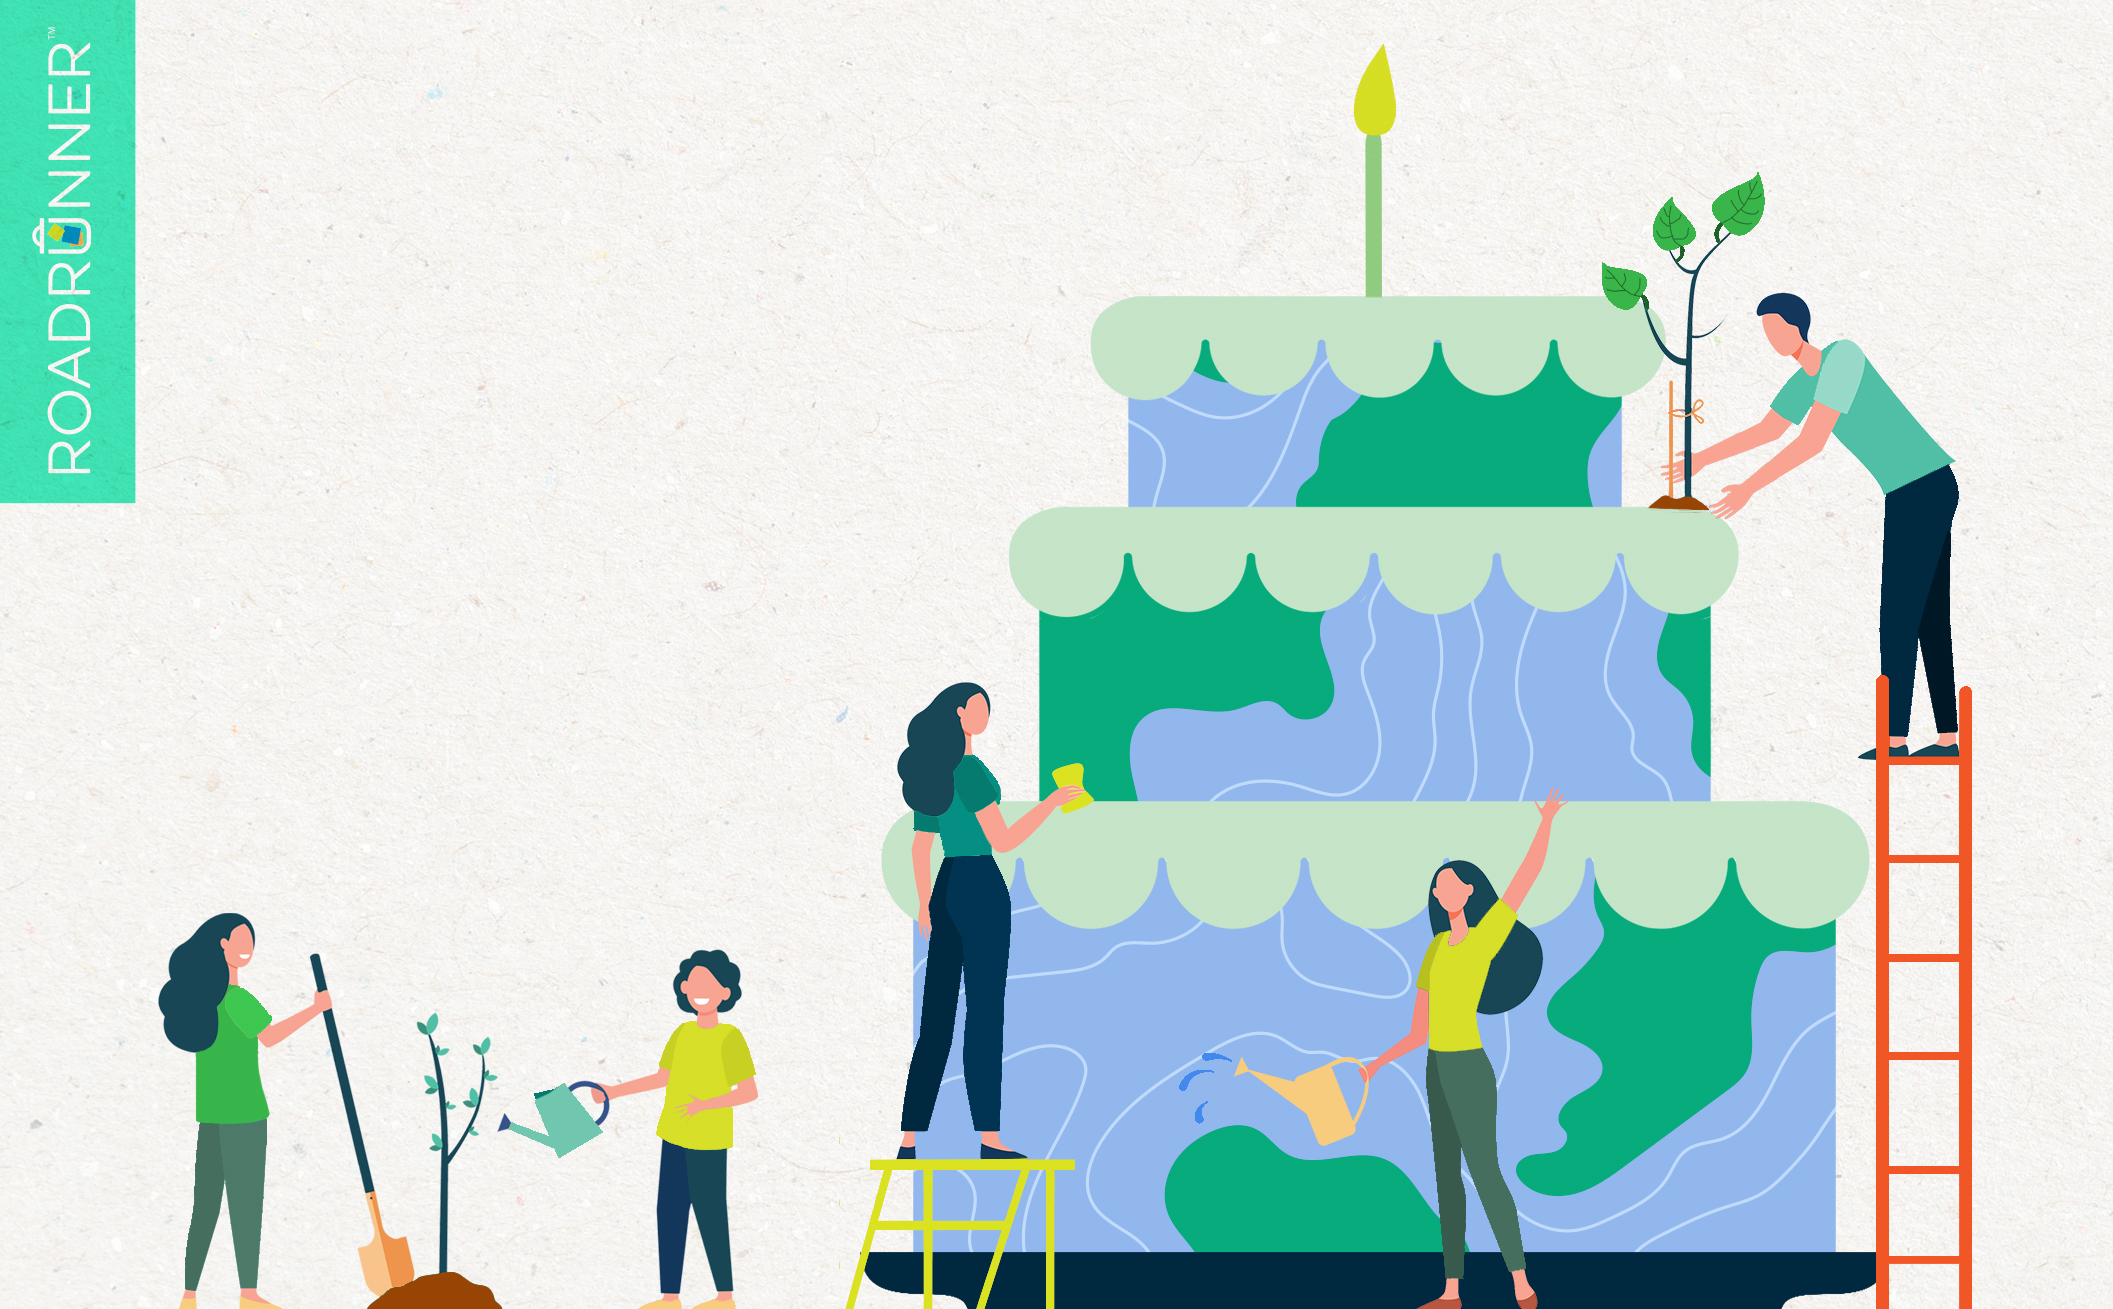 5 Easy Ways Your Business Can Celebrate Earth Day